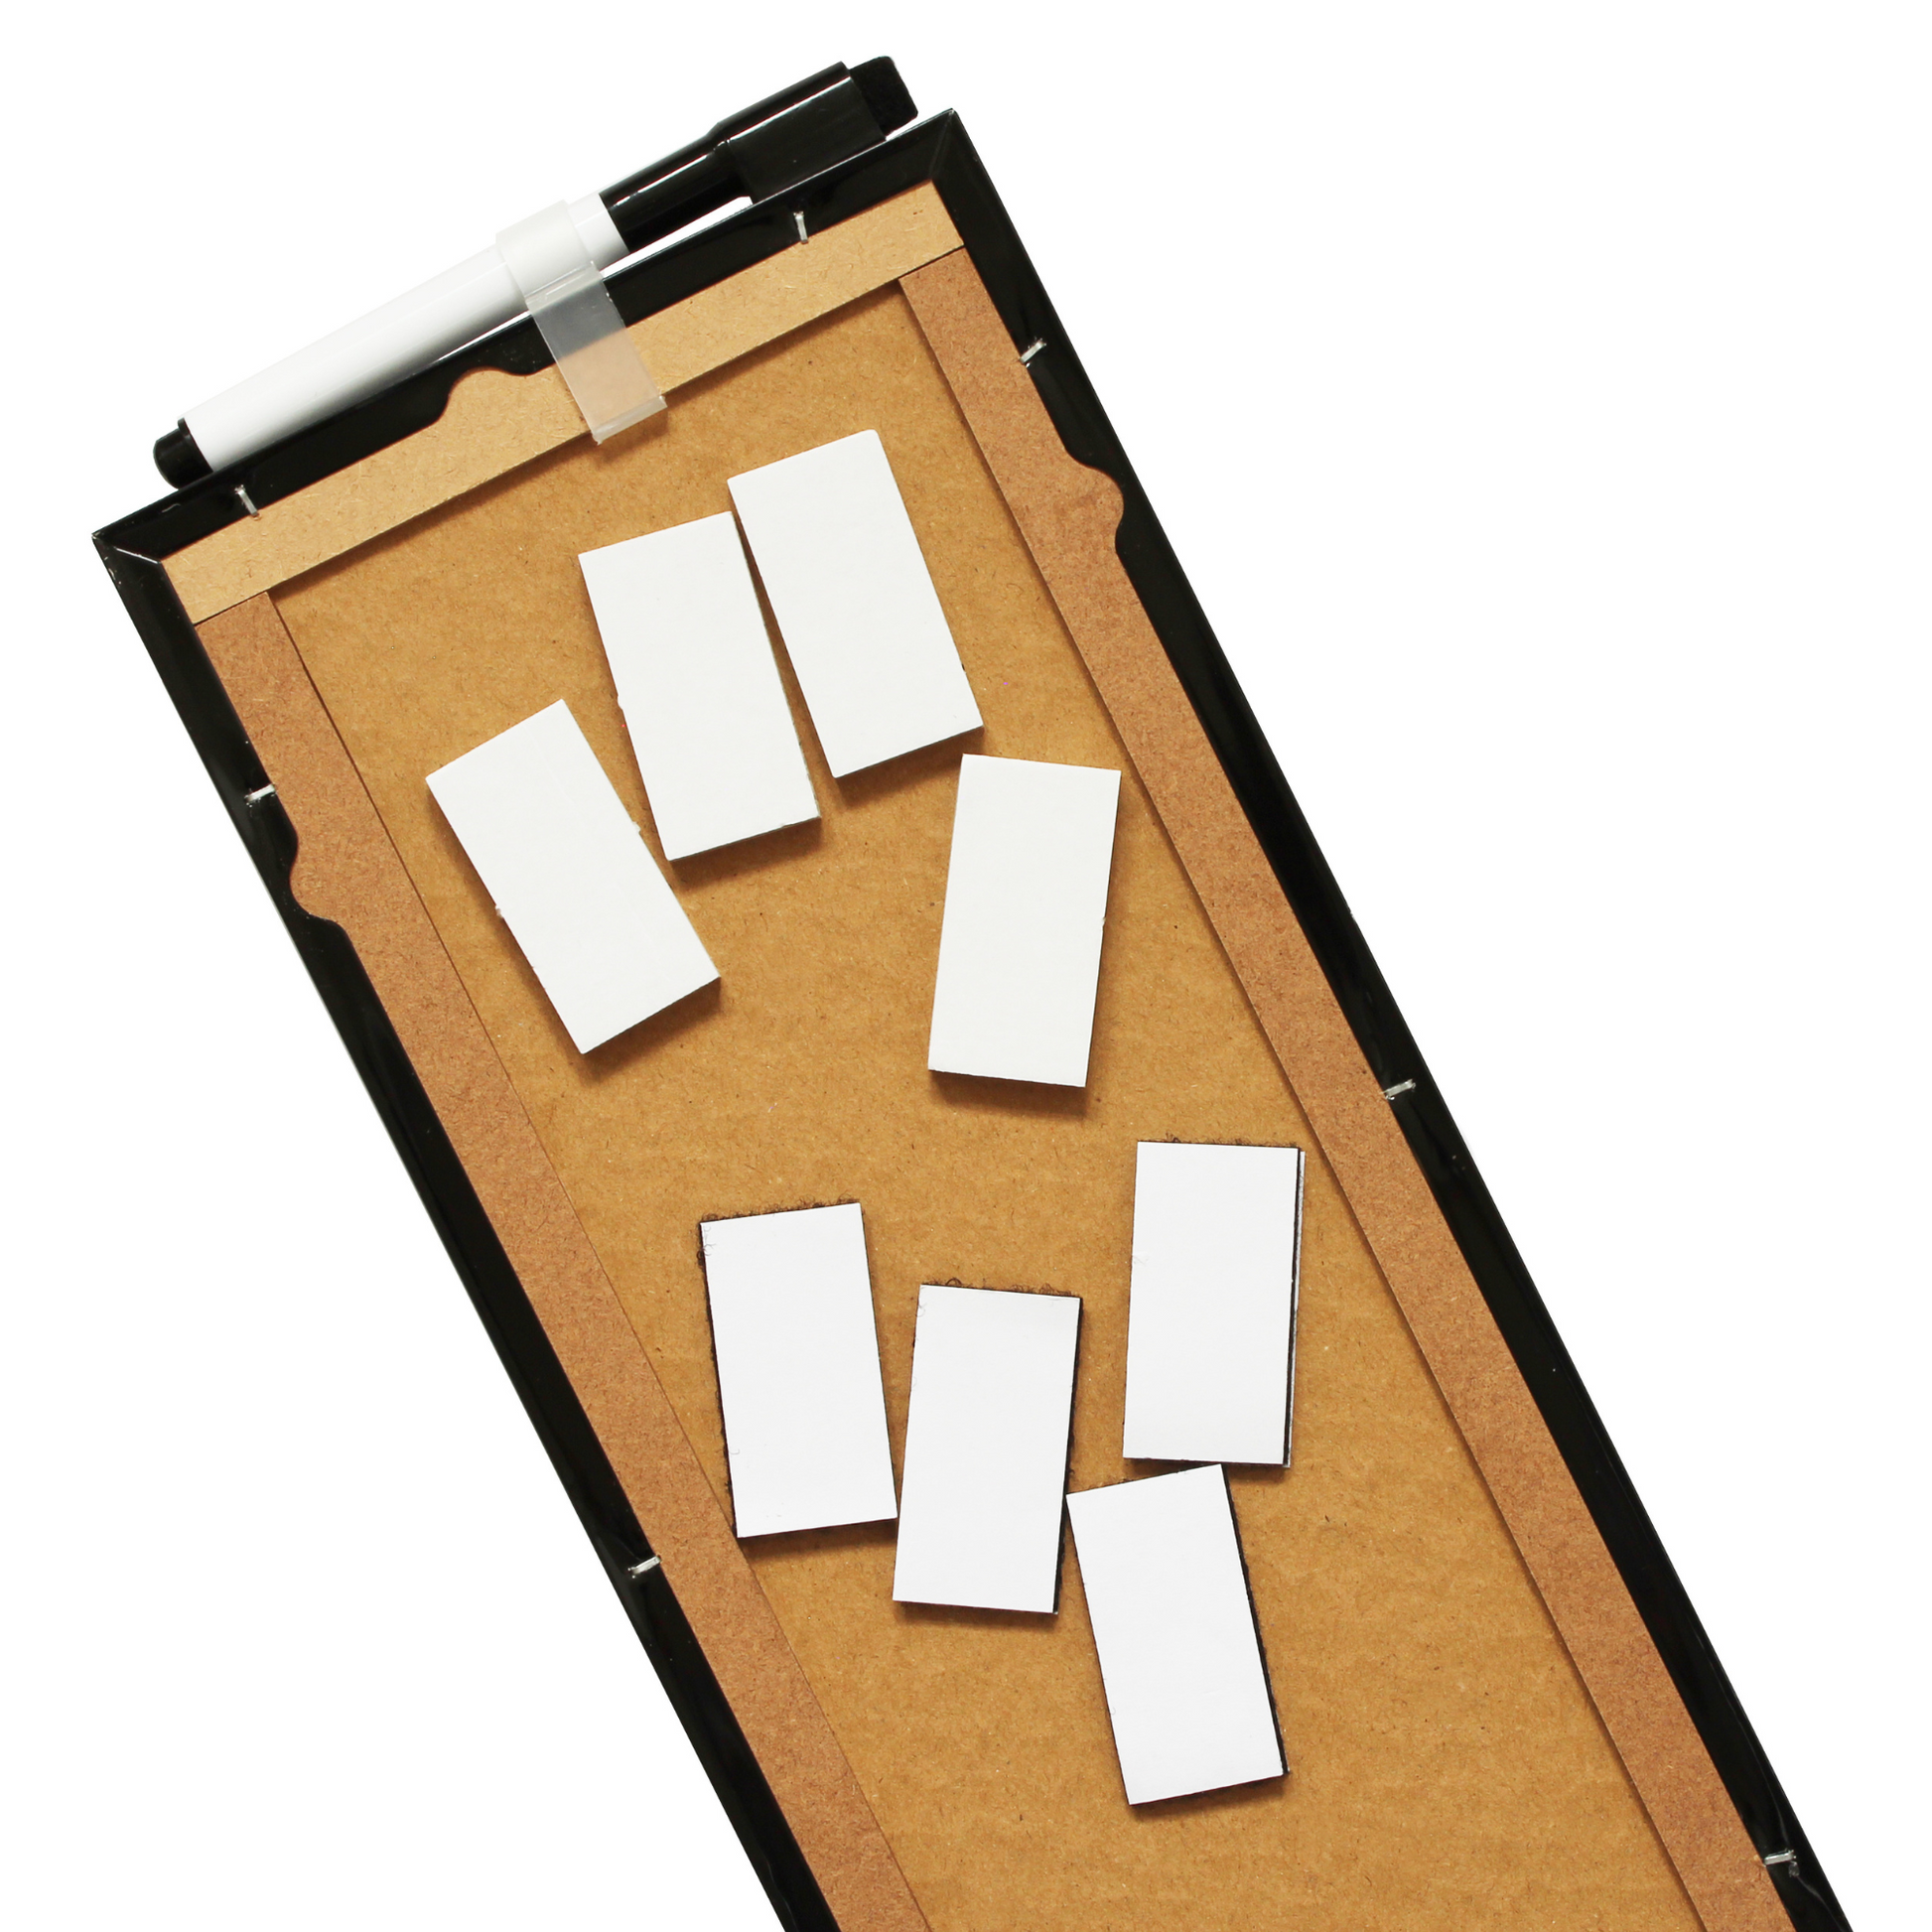 Rear of a frameless dry-erase board showing sturdy MDF backing, as well as reinforced edges, including white sticky pads scattered on the surface and a marker with an eraser attached to the top. The image shows the easy mounting ability of the boards.